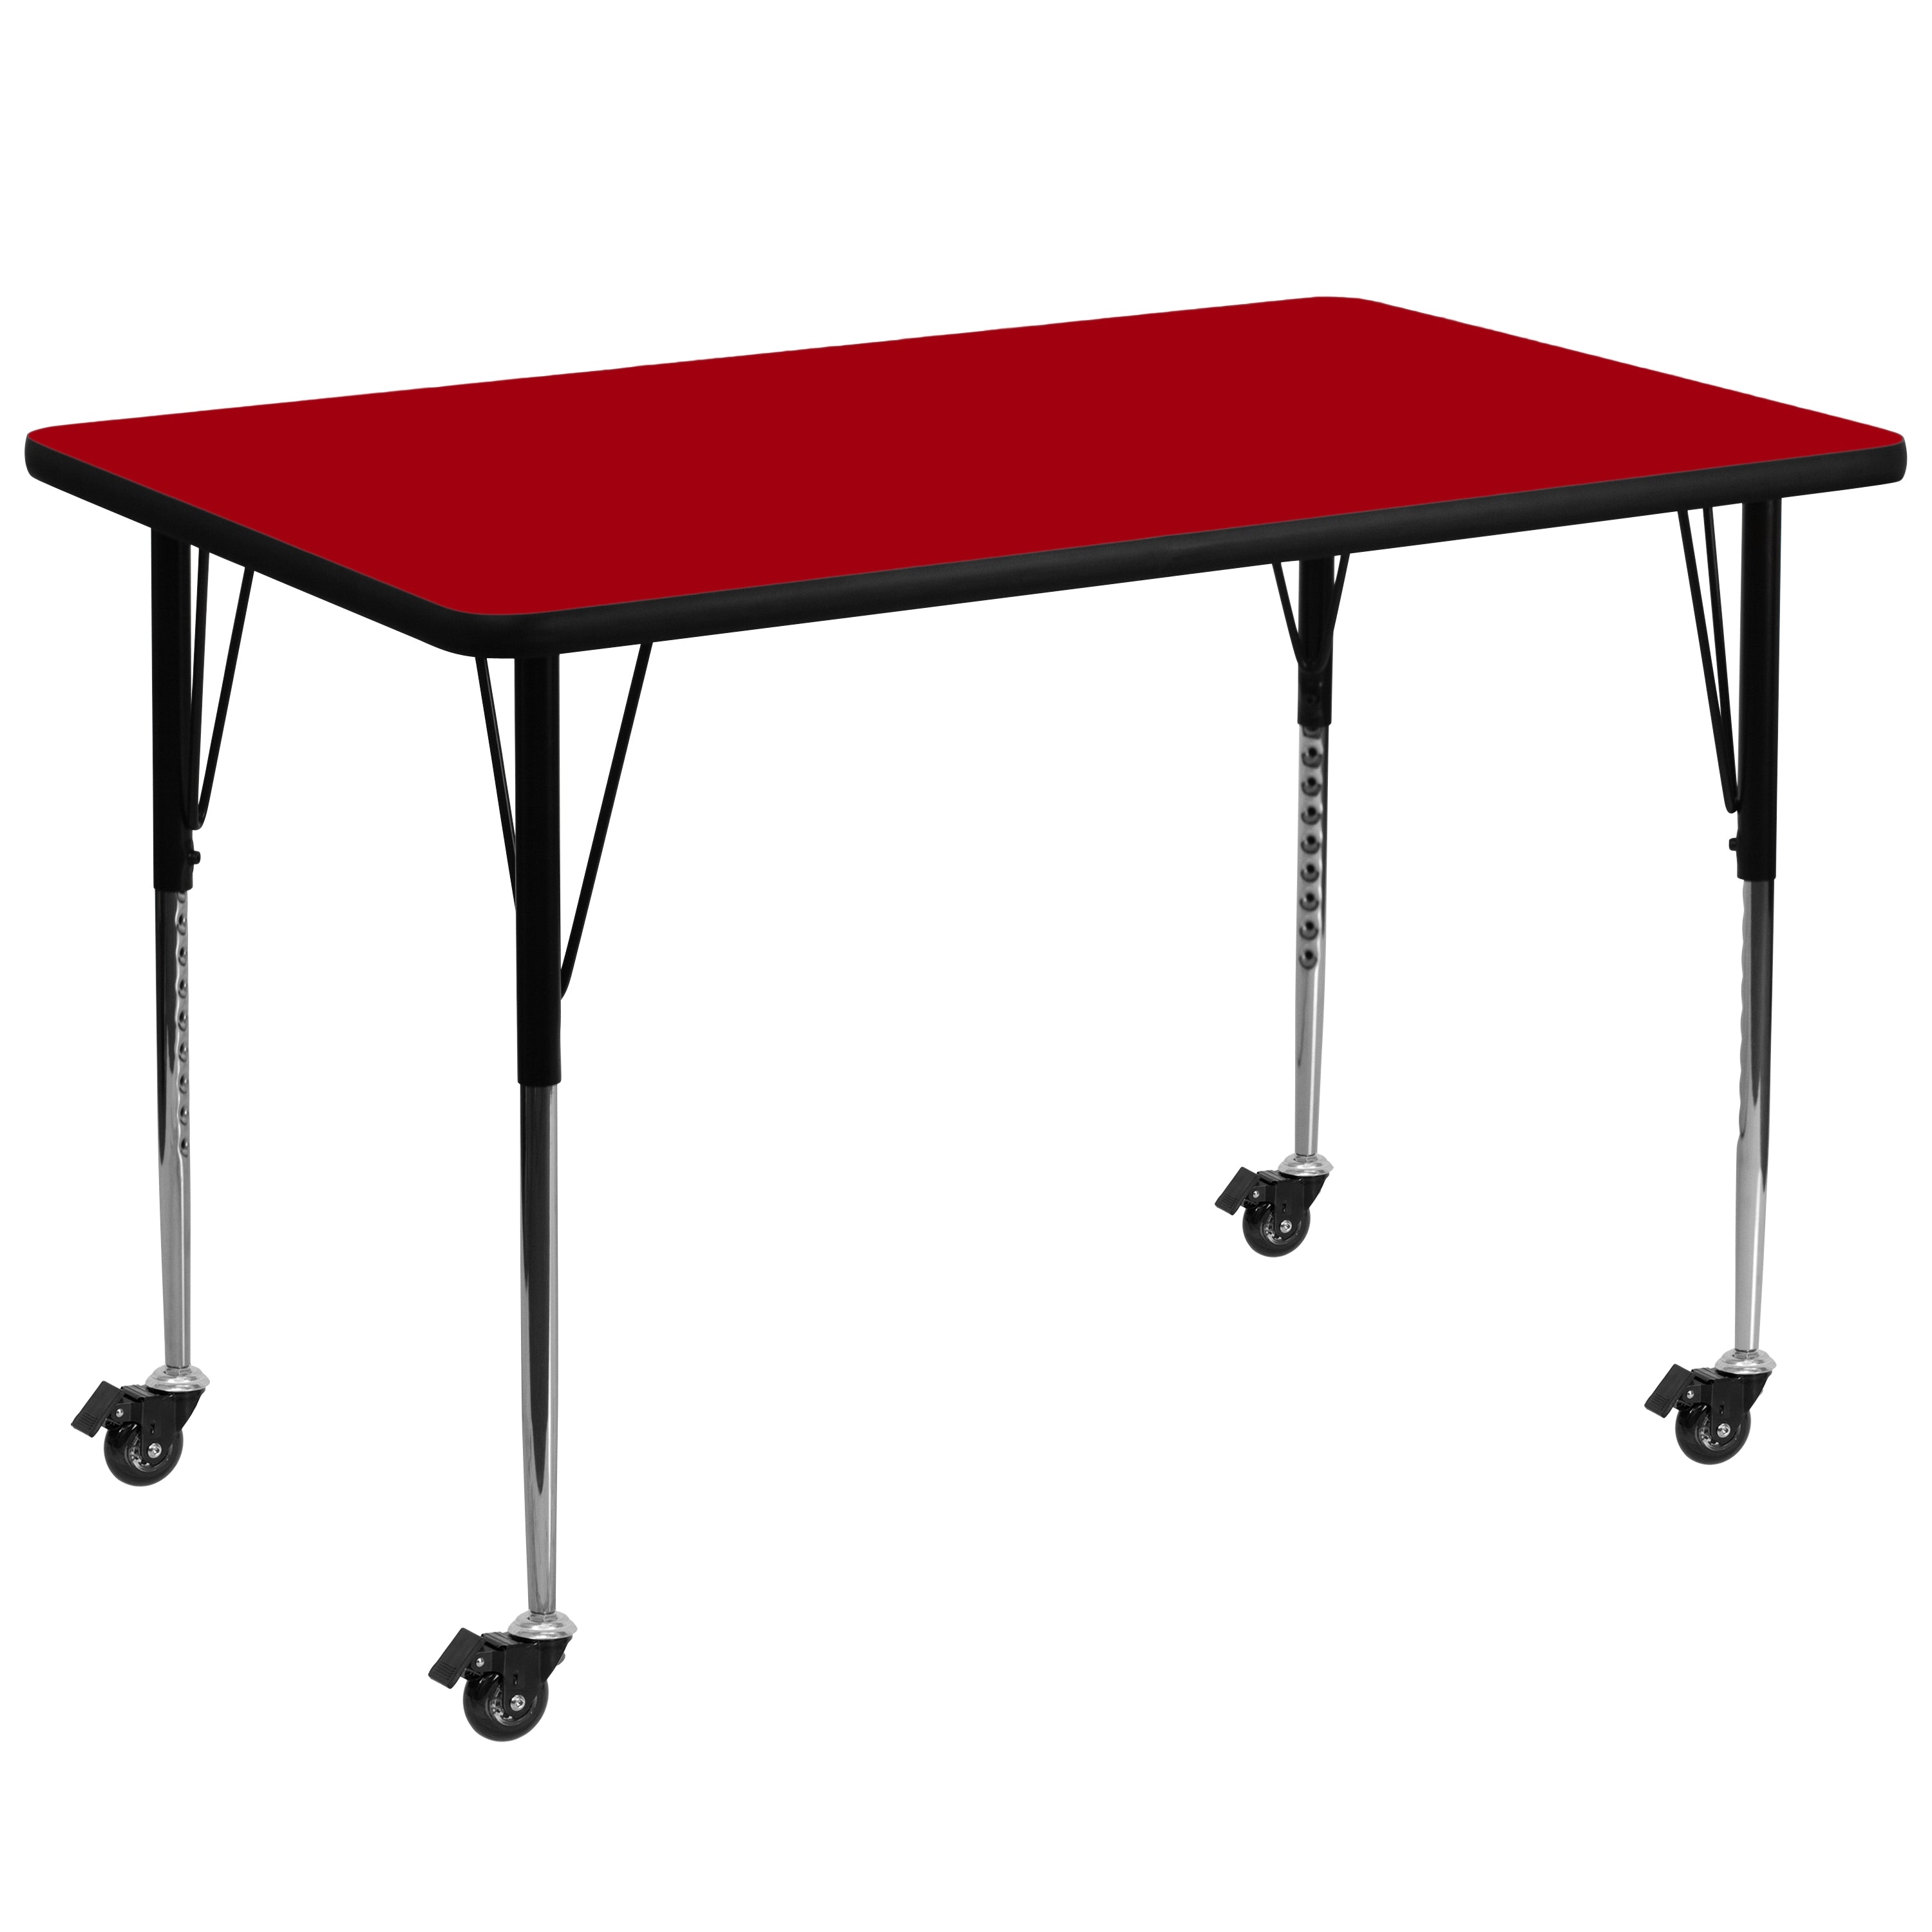 Mobile 36''W x 72''L Rectangular Thermal Laminate Activity Table - Standard Height Adjustable Legs-Rectangular Activity Table with Casters-Flash Furniture-Wall2Wall Furnishings